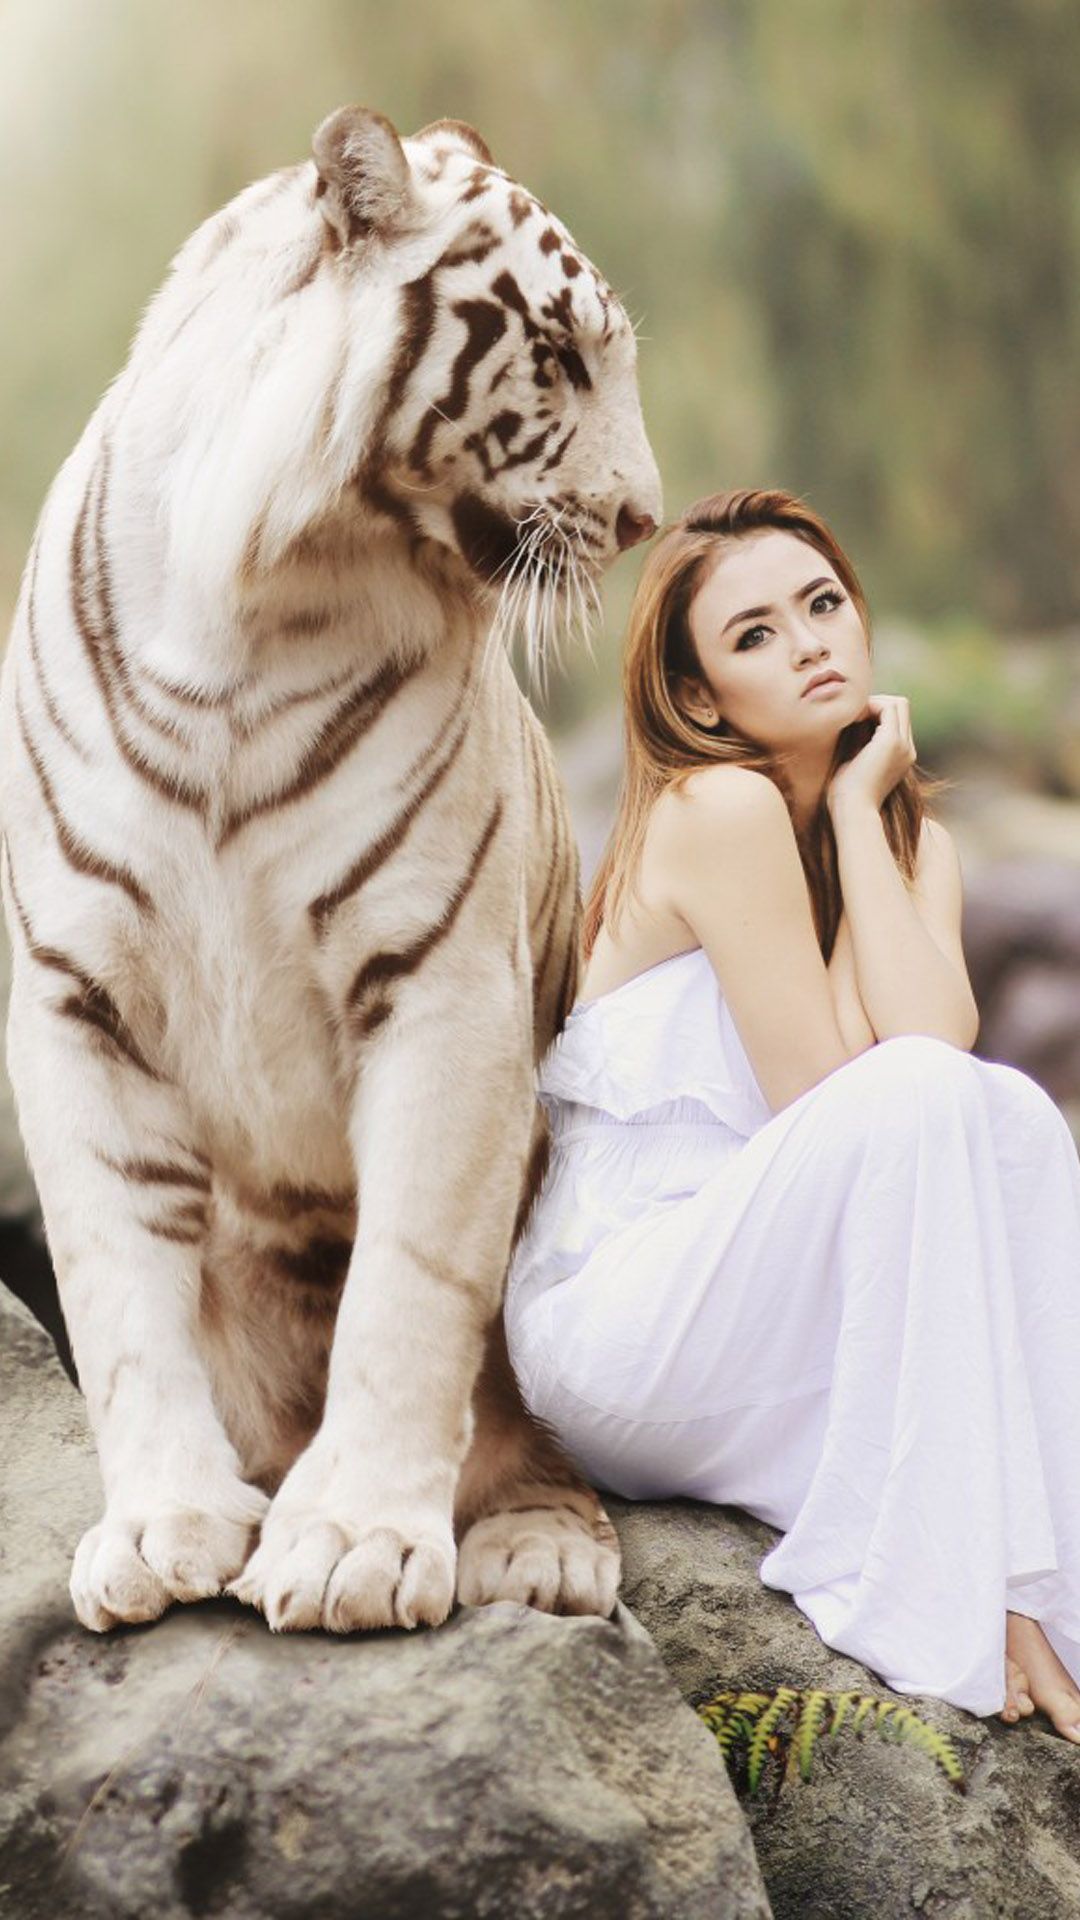 Asian Model With White Tiger Photohoot 4K Ultra HD Mobile Wallpaper